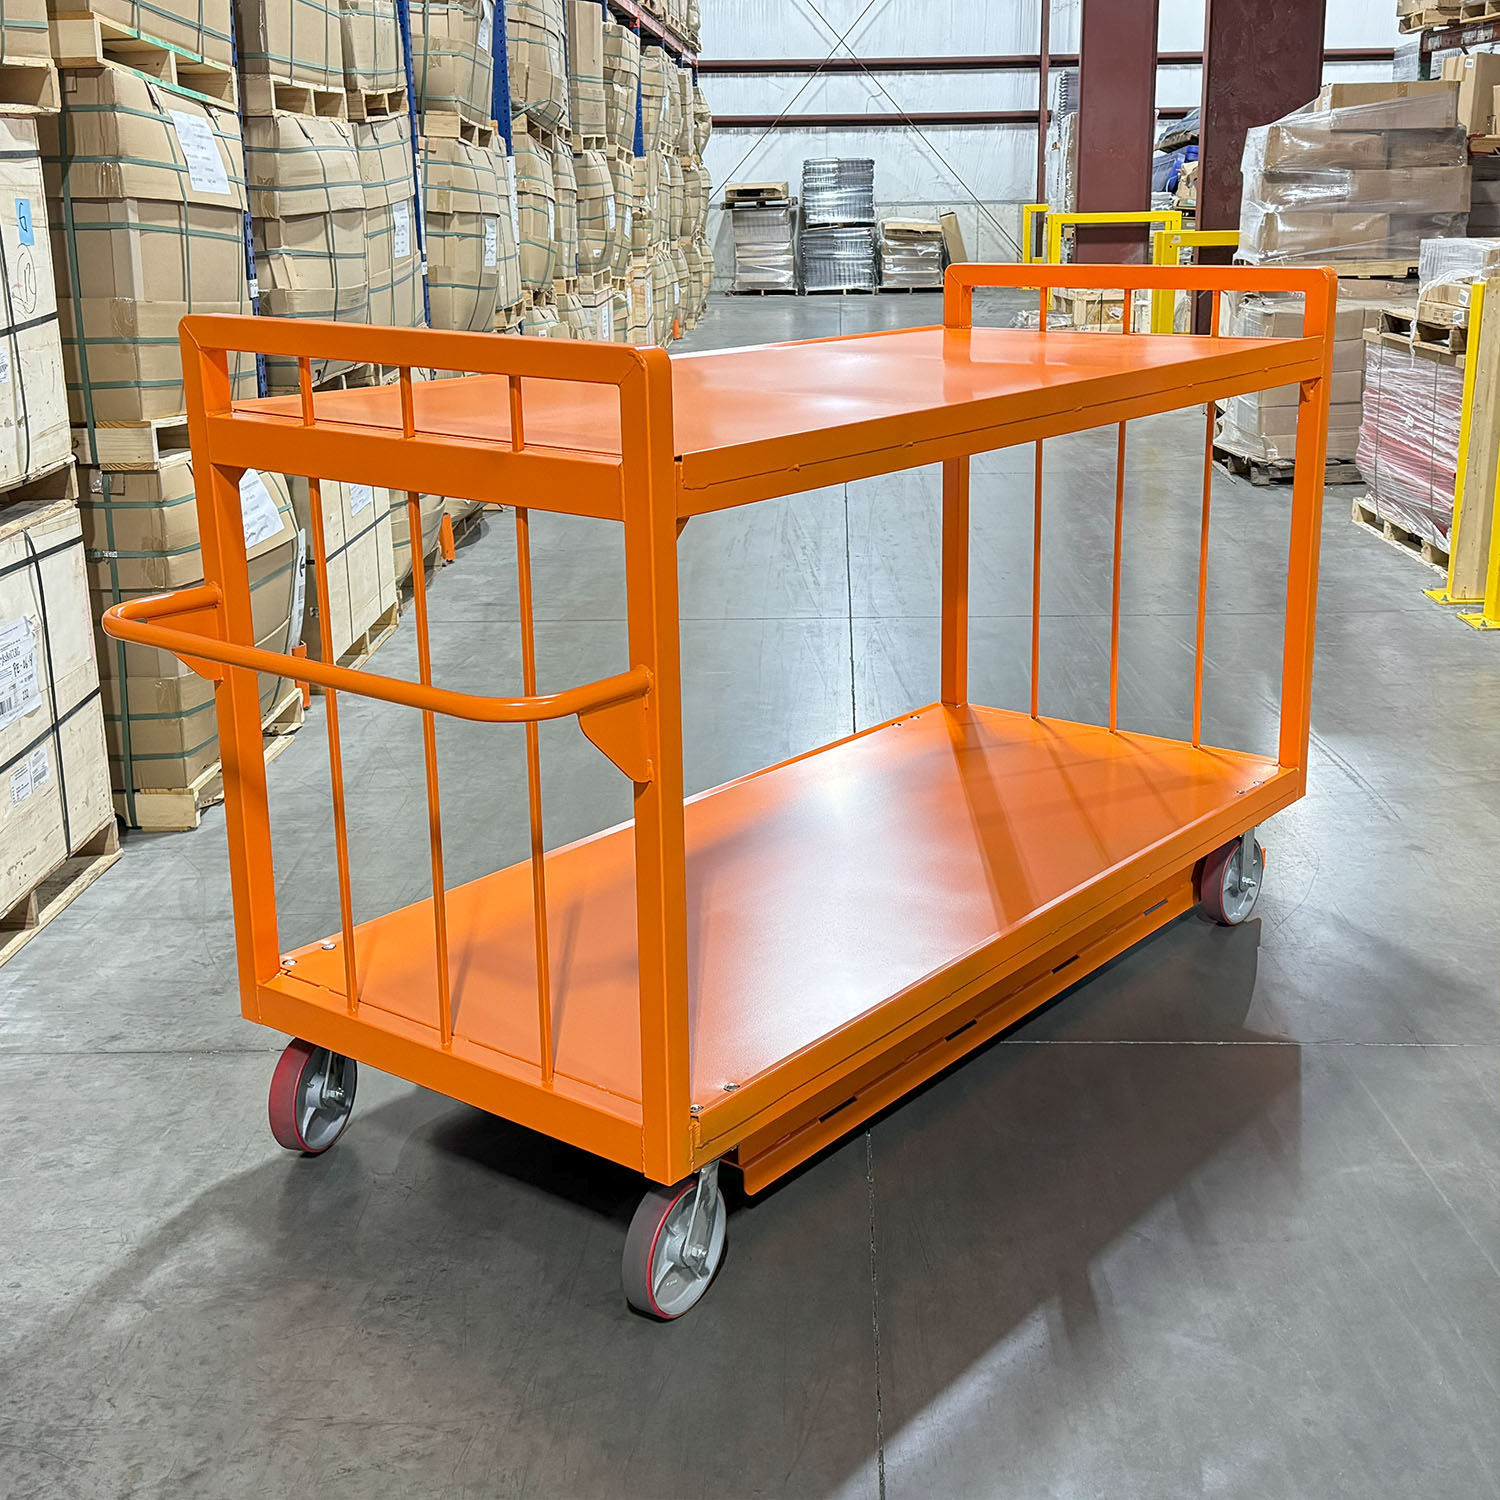 Forklift Compatible. Universal forklift-accepting pockets. Pockets accessible from back end of cart. Utility Cart Transport Cart Handling Trolley Conveyance Cart Logistics Cart Transport Trolley Warehouse Cart Service Cart Industrial Cart Load Carrier Hauling Cart Carrying Cart Freight Cart Transfer Cart Shuttle Cart Rolling Cart Handling Dolly Cargo Cart Movable Cart Stock Cart